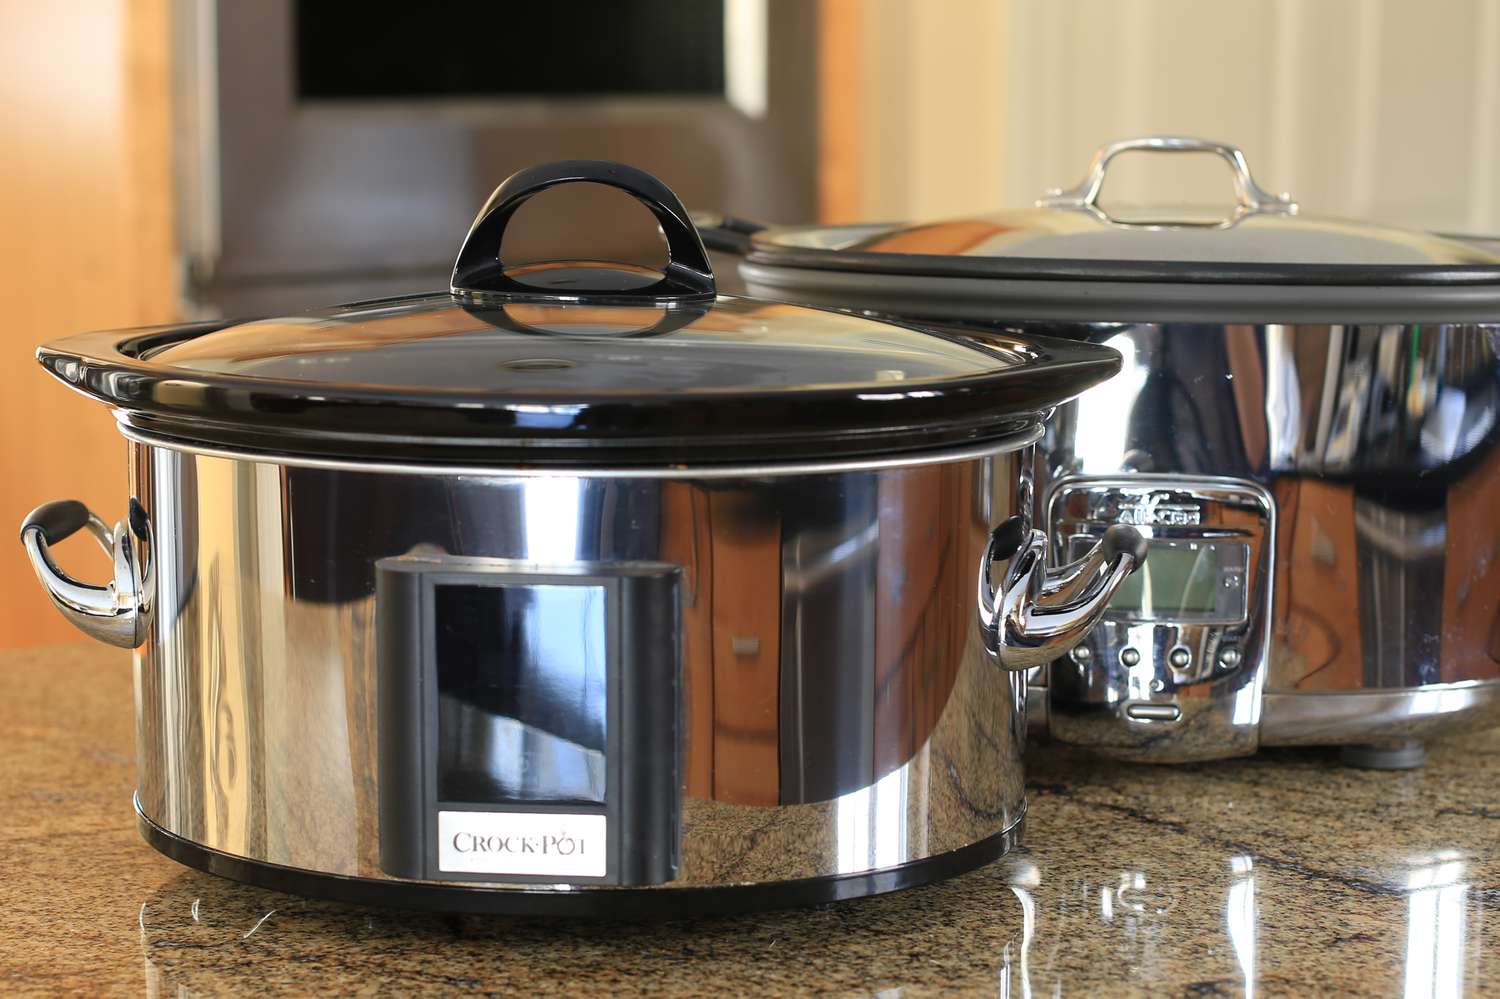 What Is The Difference Between A Crockpot And A Slow Cooker